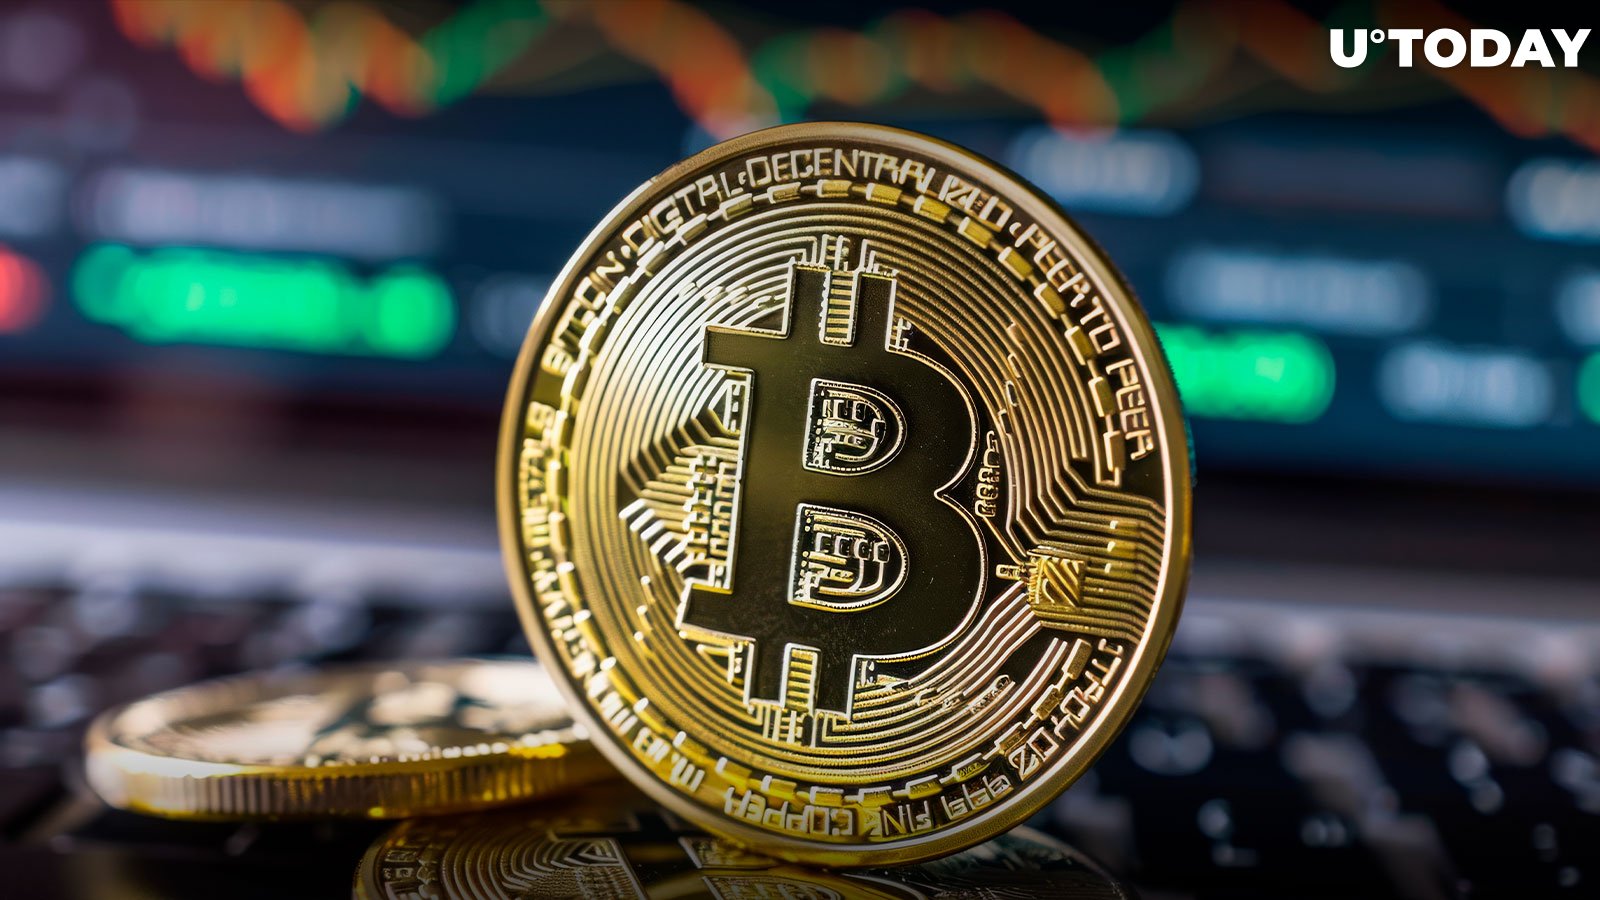 This indicator shows that the price of Bitcoin (BTC) is still undervalued